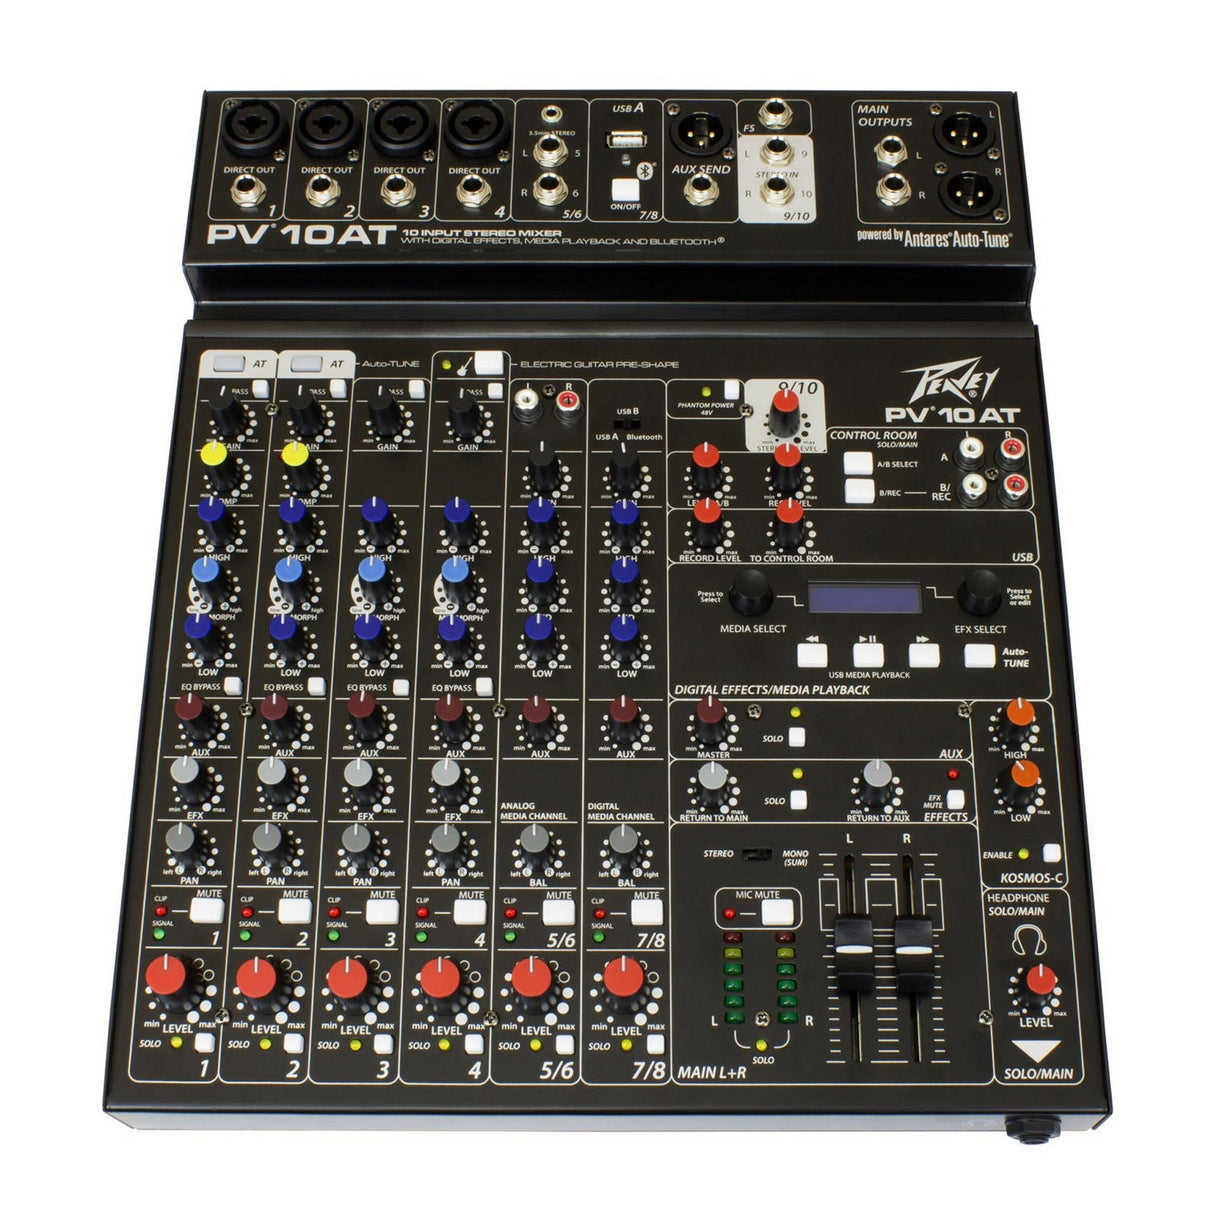 Peavey PV 10AT Compact 10 Channel Mixer with Bluetooth and Antares Auto-Tune